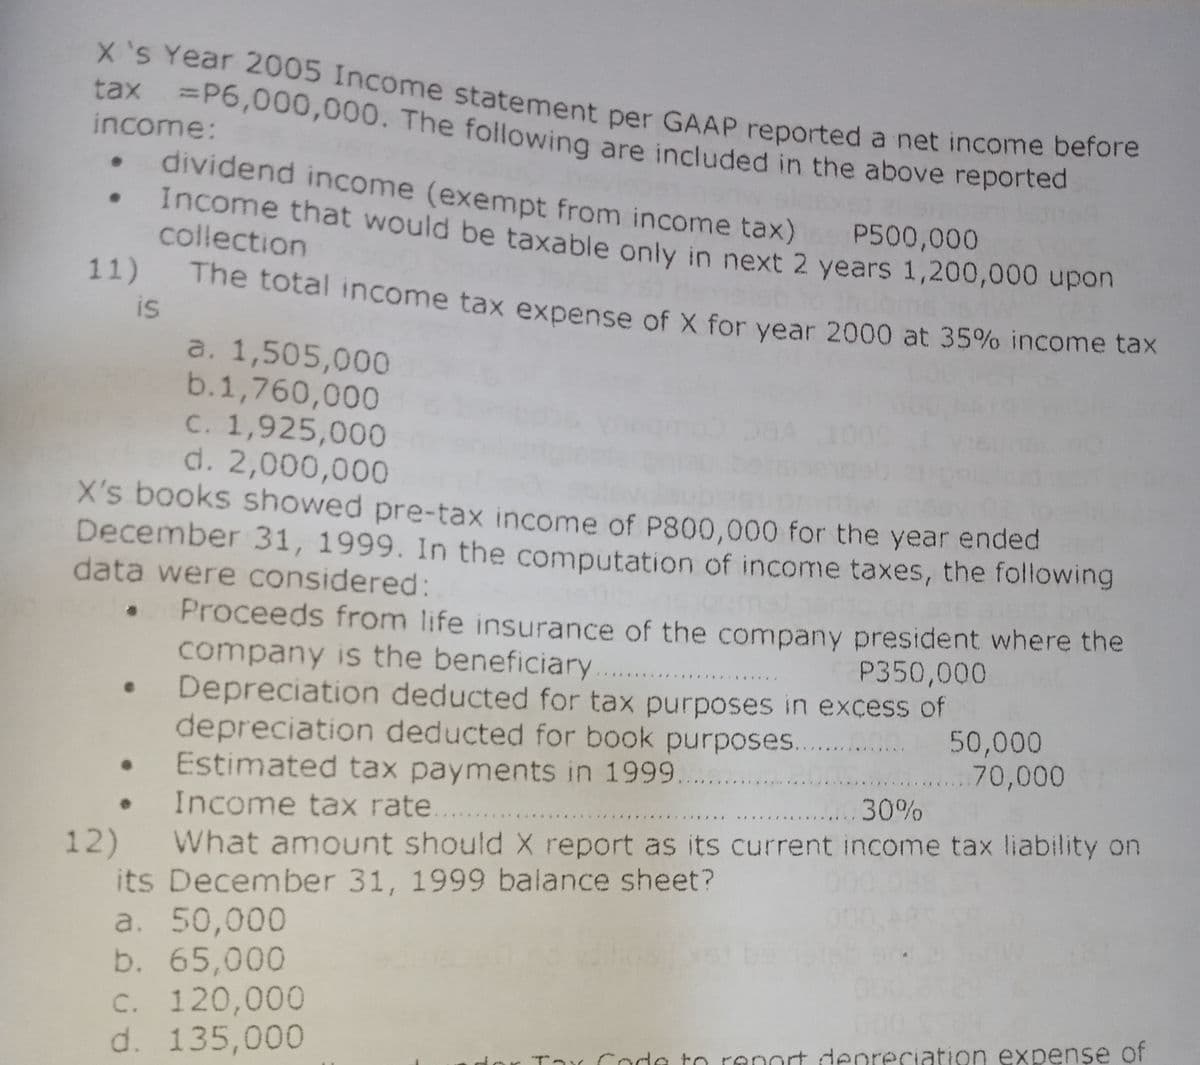 X's Year 2005 Income statement per GAAP reported a net income before
tax =P6,000,000. The following are included in the above reported
%3D
income:
dividend income (exempt from income tax)
Income that would be taxable only in next 2 years 1,200,000 upN
collection
P500,000
11)
The total income tax expense of X for year 2000 at 35% income tax
is
a. 1,505,000
b.1,760,000
C. 1,925,000
d. 2,000,000
X's books showed pre-tax income of P800,000 for the year ended
December 31, 1999. In the computation of income taxes, the following
data were considered:
Proceeds from life insurance of the company president where the
company is the beneficiary
Depreciation deducted for tax purposes in excess of
depreciation deducted for book purposes.
• Estimated tax payments in 1999.
P350,000
50,000
70,000
...30%
Income tax rate.
What amount should X report as its current income tax liability on
12)
its December 31, 1999 balance sheet?
a. 50,000
b. 65,000
C. 120,000
d. 135,000
Tar Code to renort denreciation expense of
